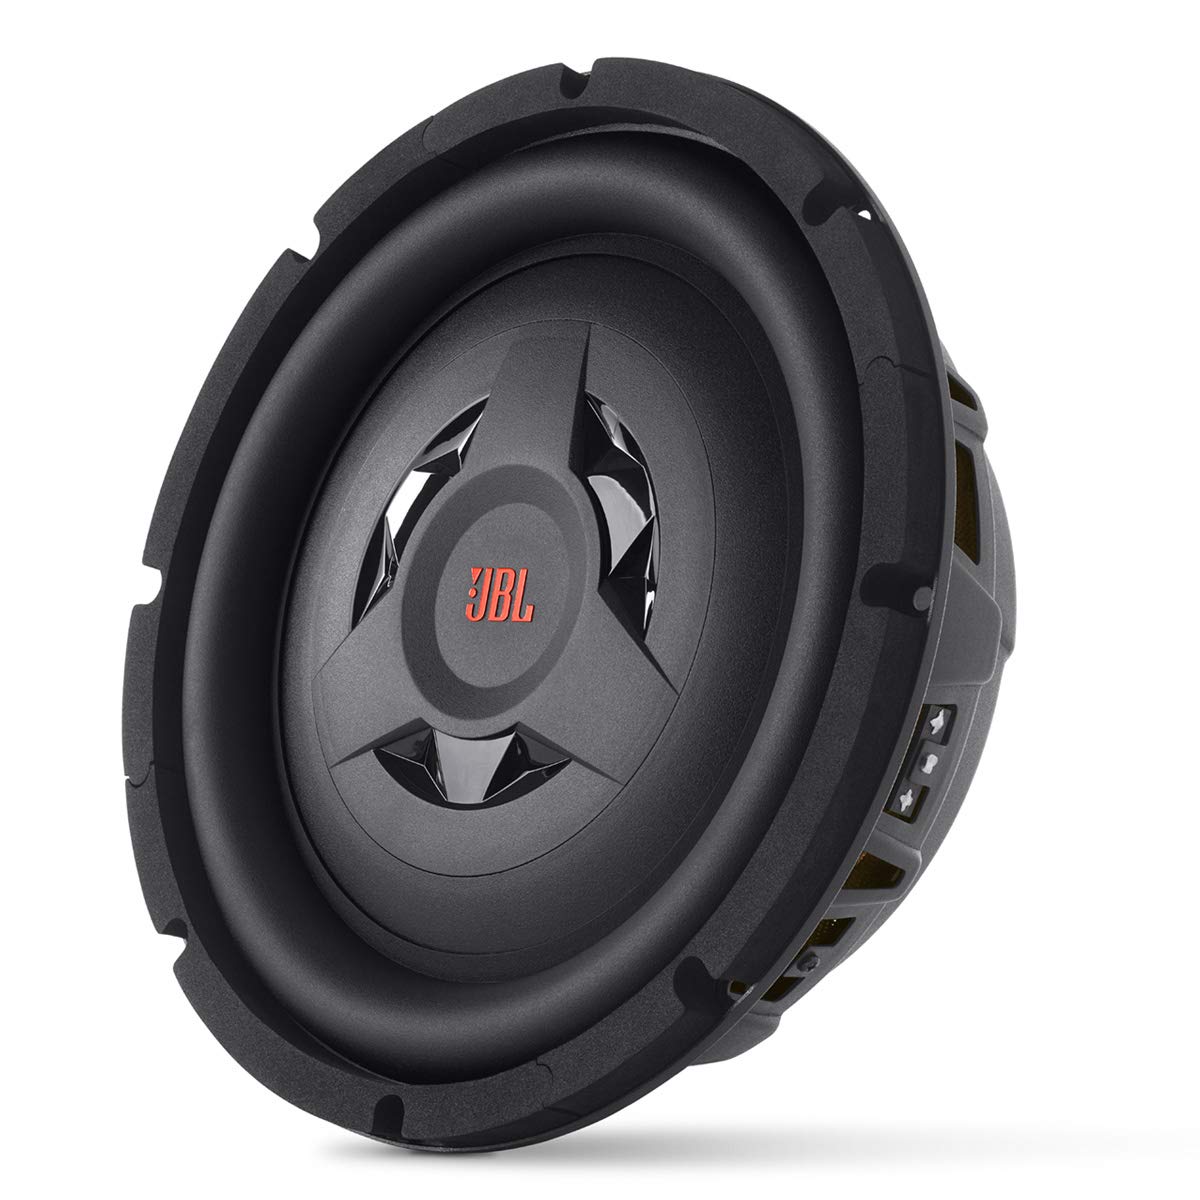 JBL Club WS1000 - 10” shallow mount subwoofer w/SSI™ (Selectable Smart Impedance) switch from 2 to 4 ohm